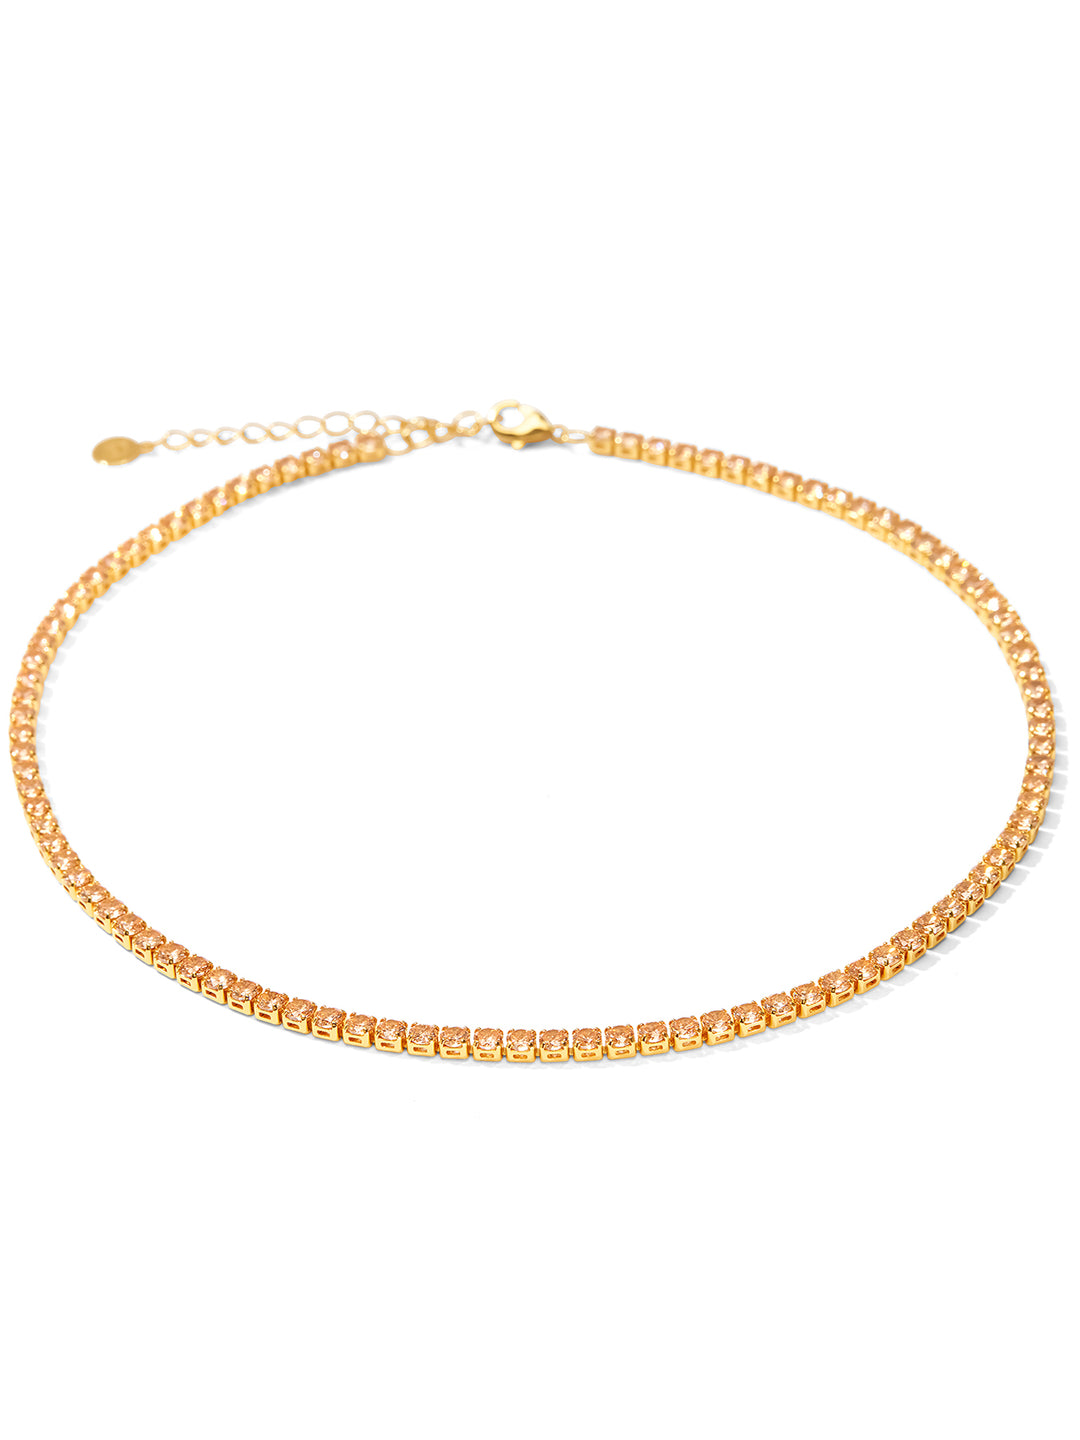 TENNIS CHOKER CHAMPAGNE • Color: 18K Yellow Gold